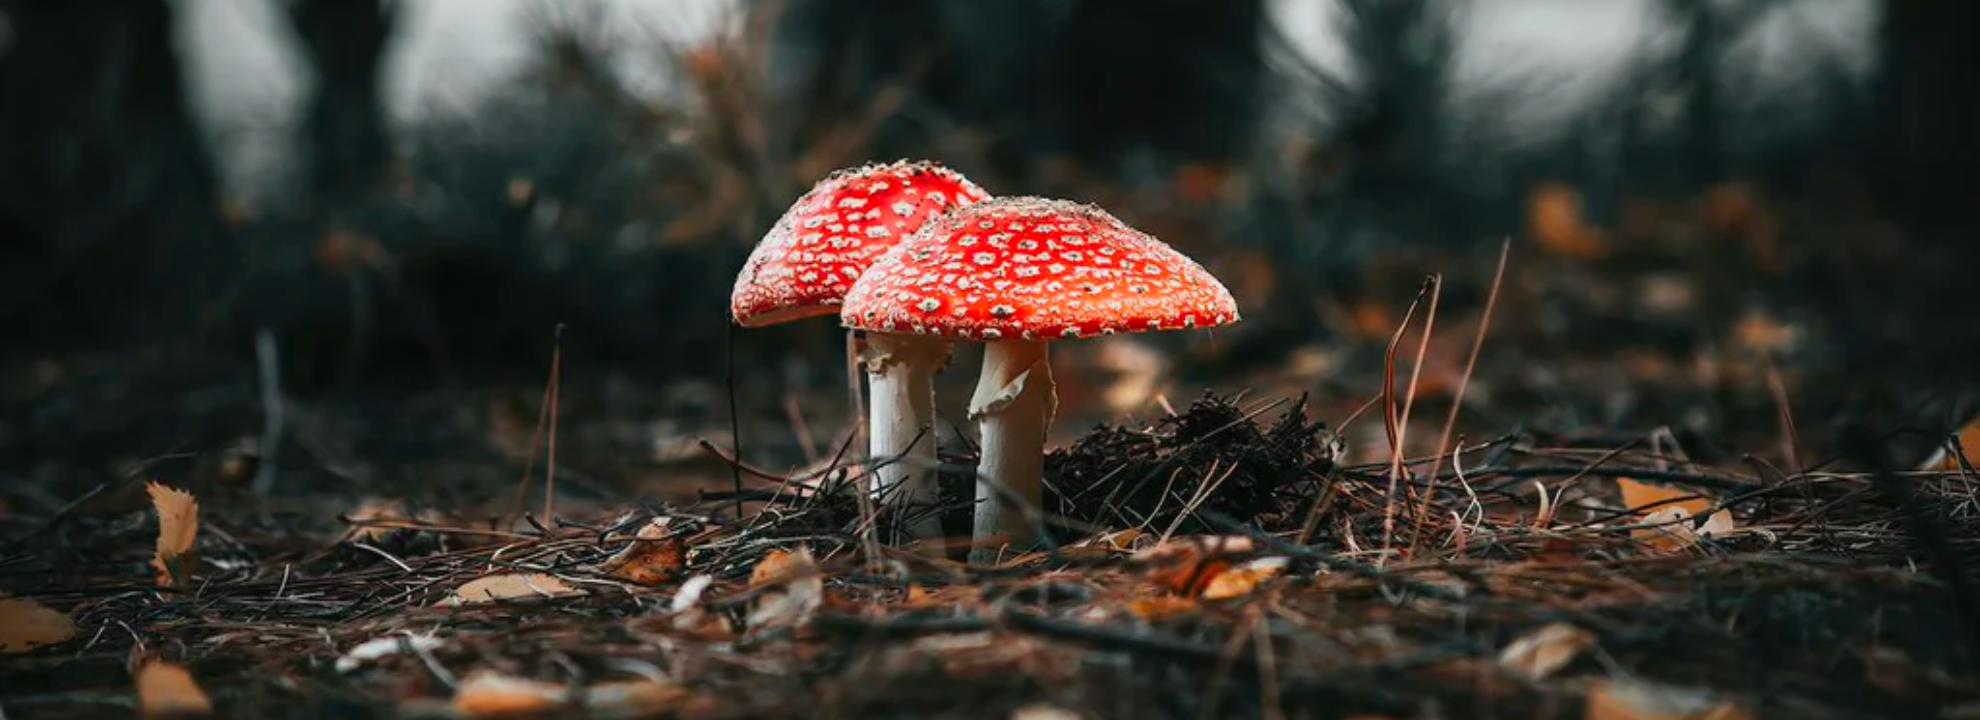 Where is Amanita Muscaria Legal in the United States?